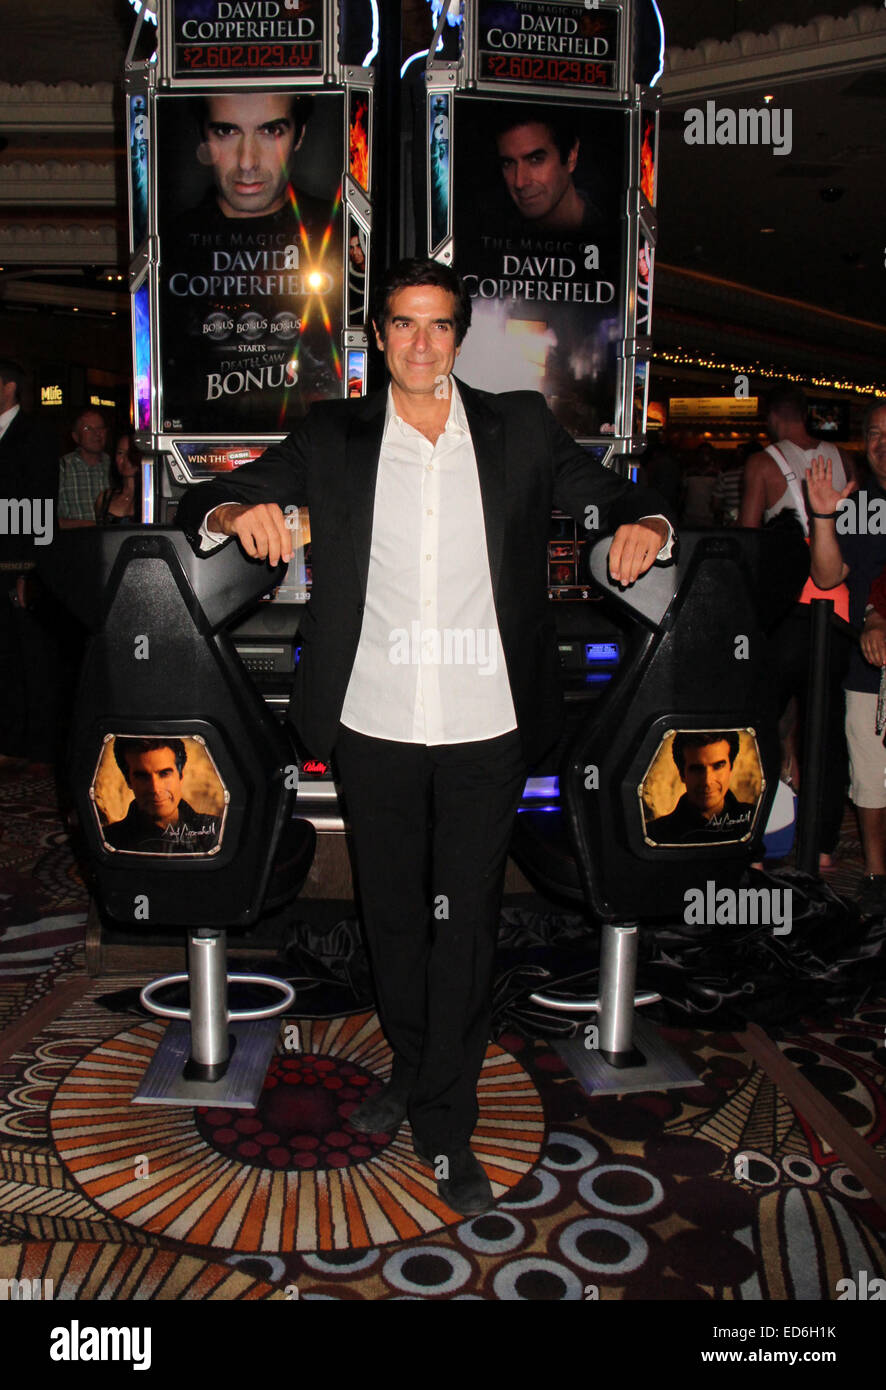 King of magic, David Copperfield, unveils his signature slot machine 'The  Magic Of David Copperfield' at the MGM Grand in Las Vegas Featuring: David  Copperfield Where: Las Vegas, Nevada, United States When: